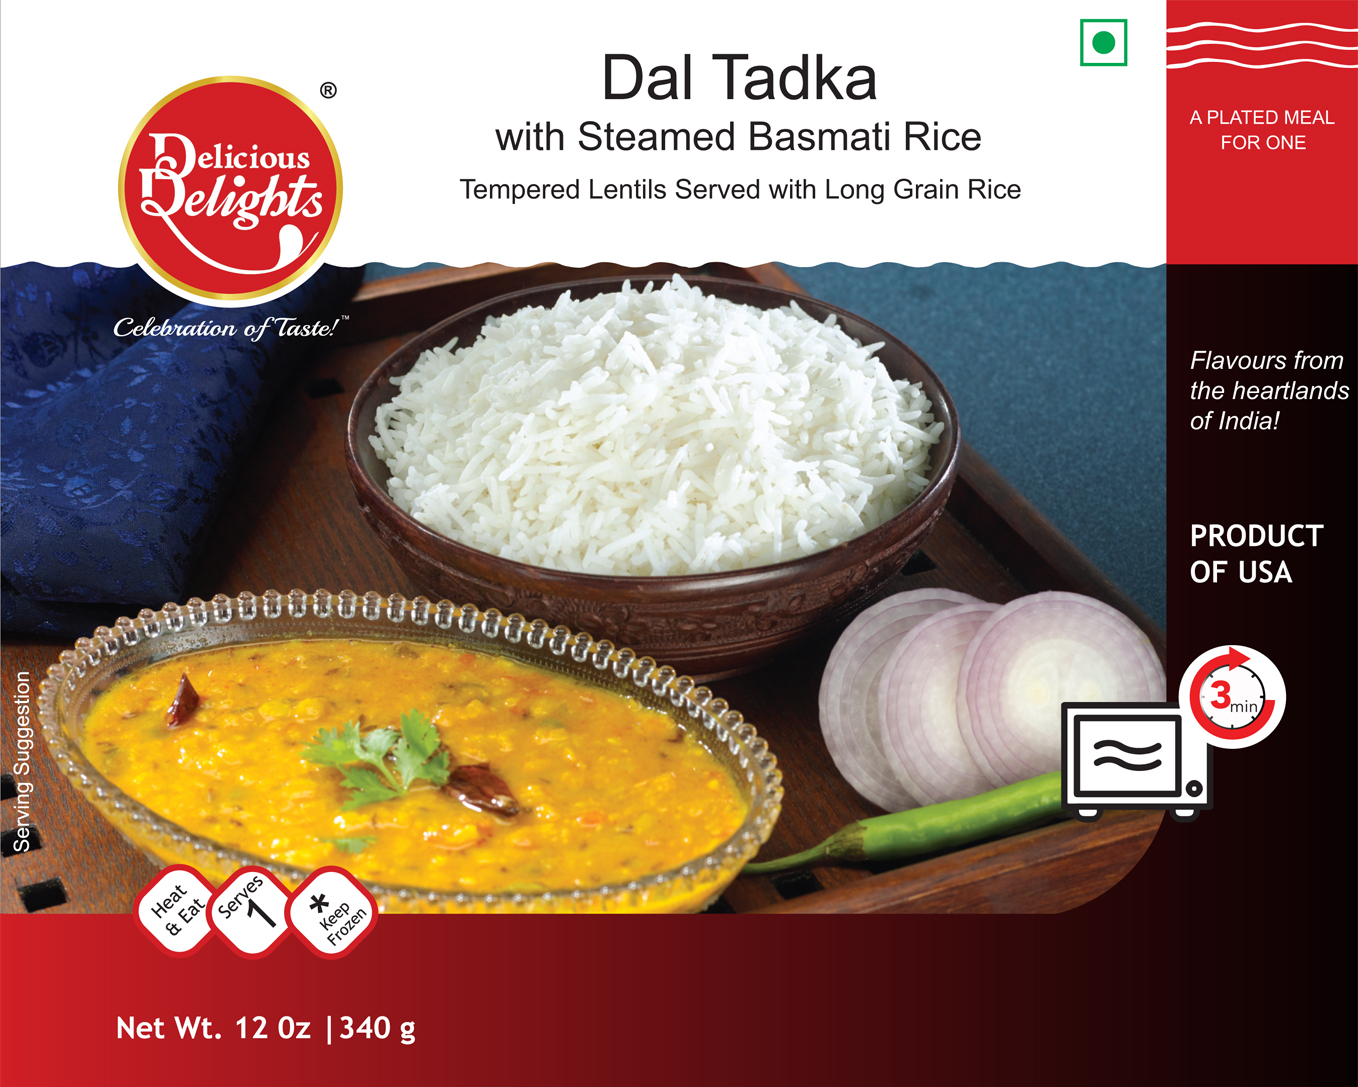 Delicious Delights Dal Tadka with Steamed Basmati Rice